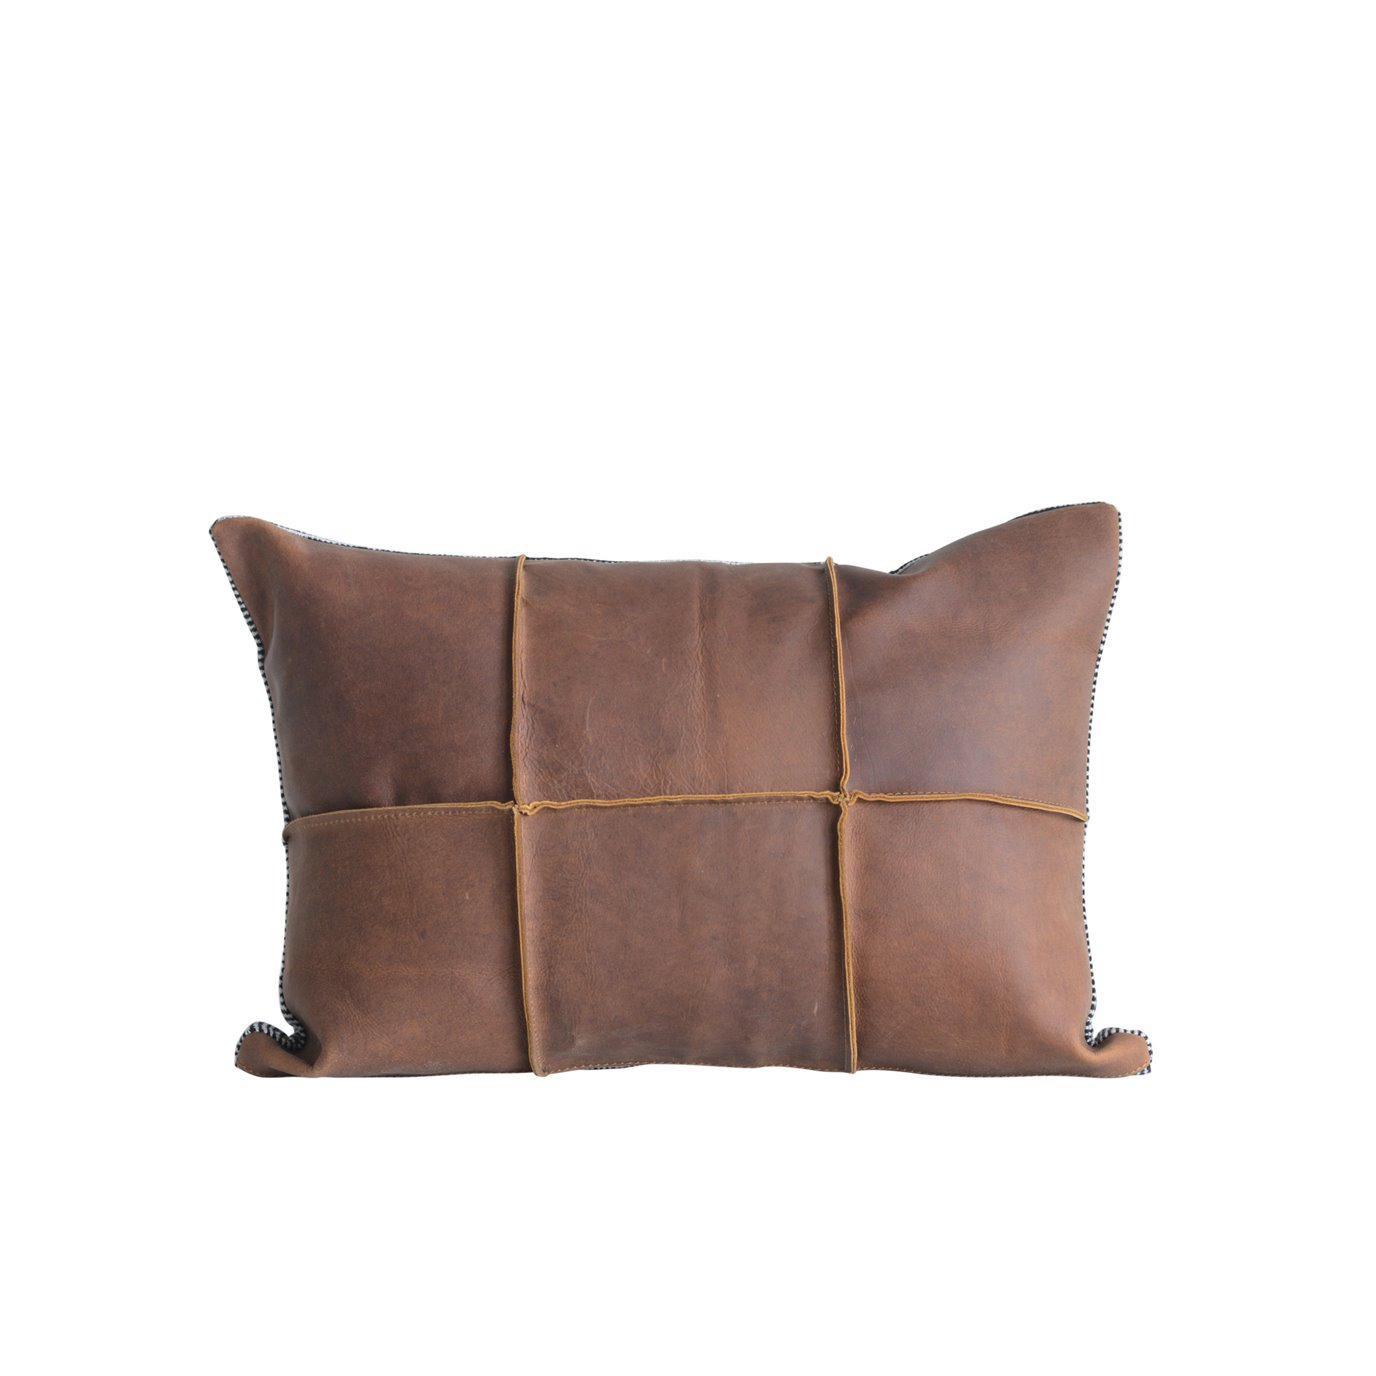 Brown Leather Pillow with Black & White Striped Felt Back